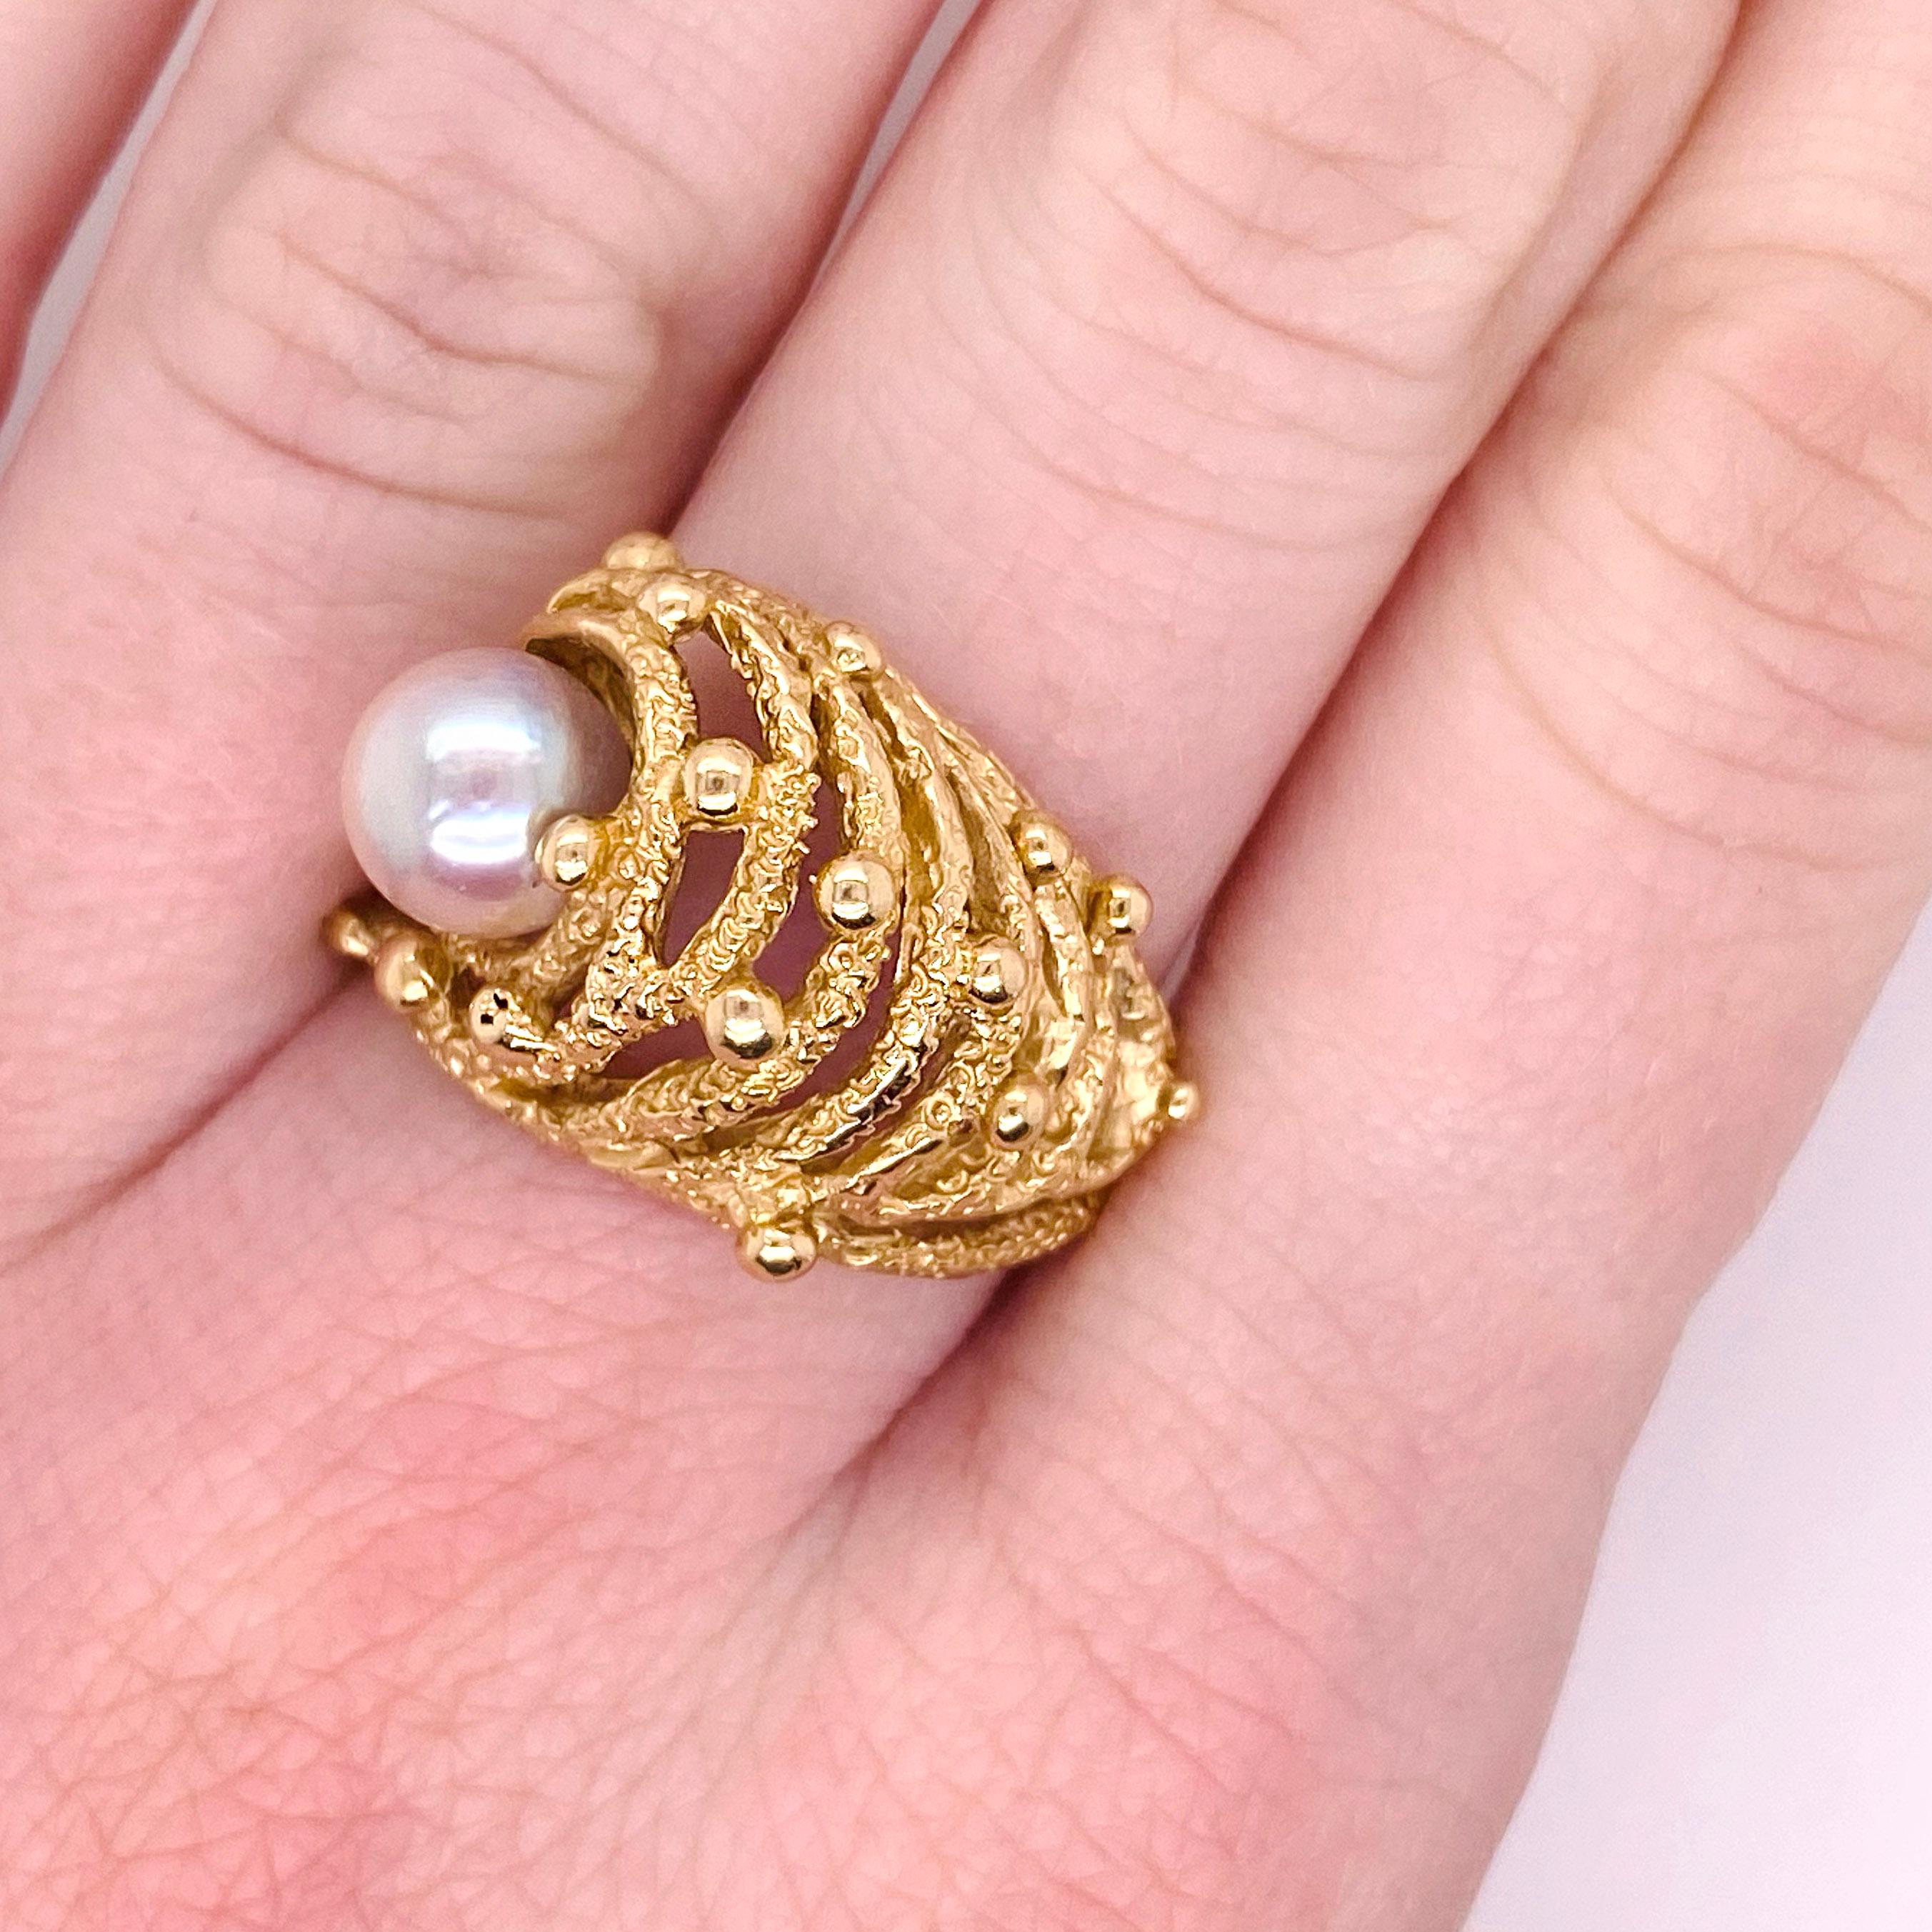 The details for this beautiful ring are listed below:
Metal Quality: 14K Yellow Gold
Gemstone: Cultured Genuine Pearl
Gemstone Shape: Round
Gemstone Color: White with Rose Overtones
Gemstone Number: 1
Top Width: 16.46 mm
Pearl Diameter: 7 1/2 - 8